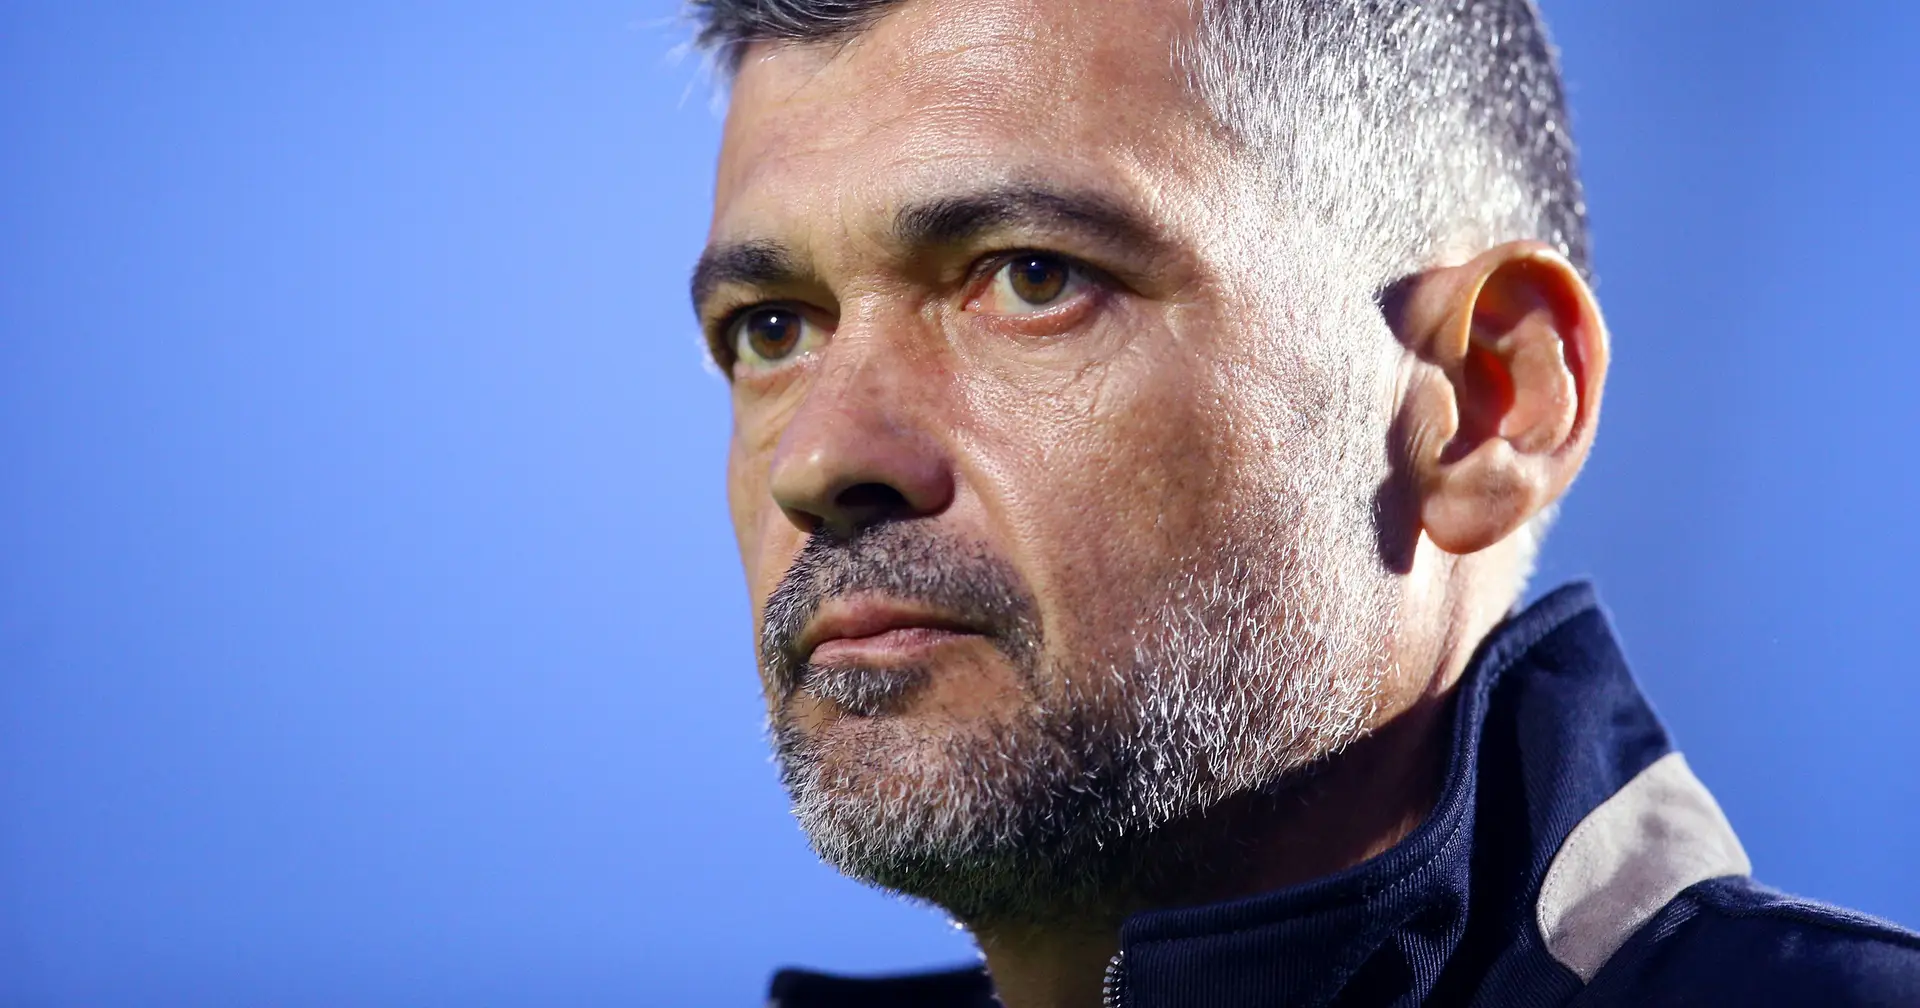 Sergio Conceicao responds to Rui Moreira’s “bad and misleading” criticism: “You may not like this great institution”